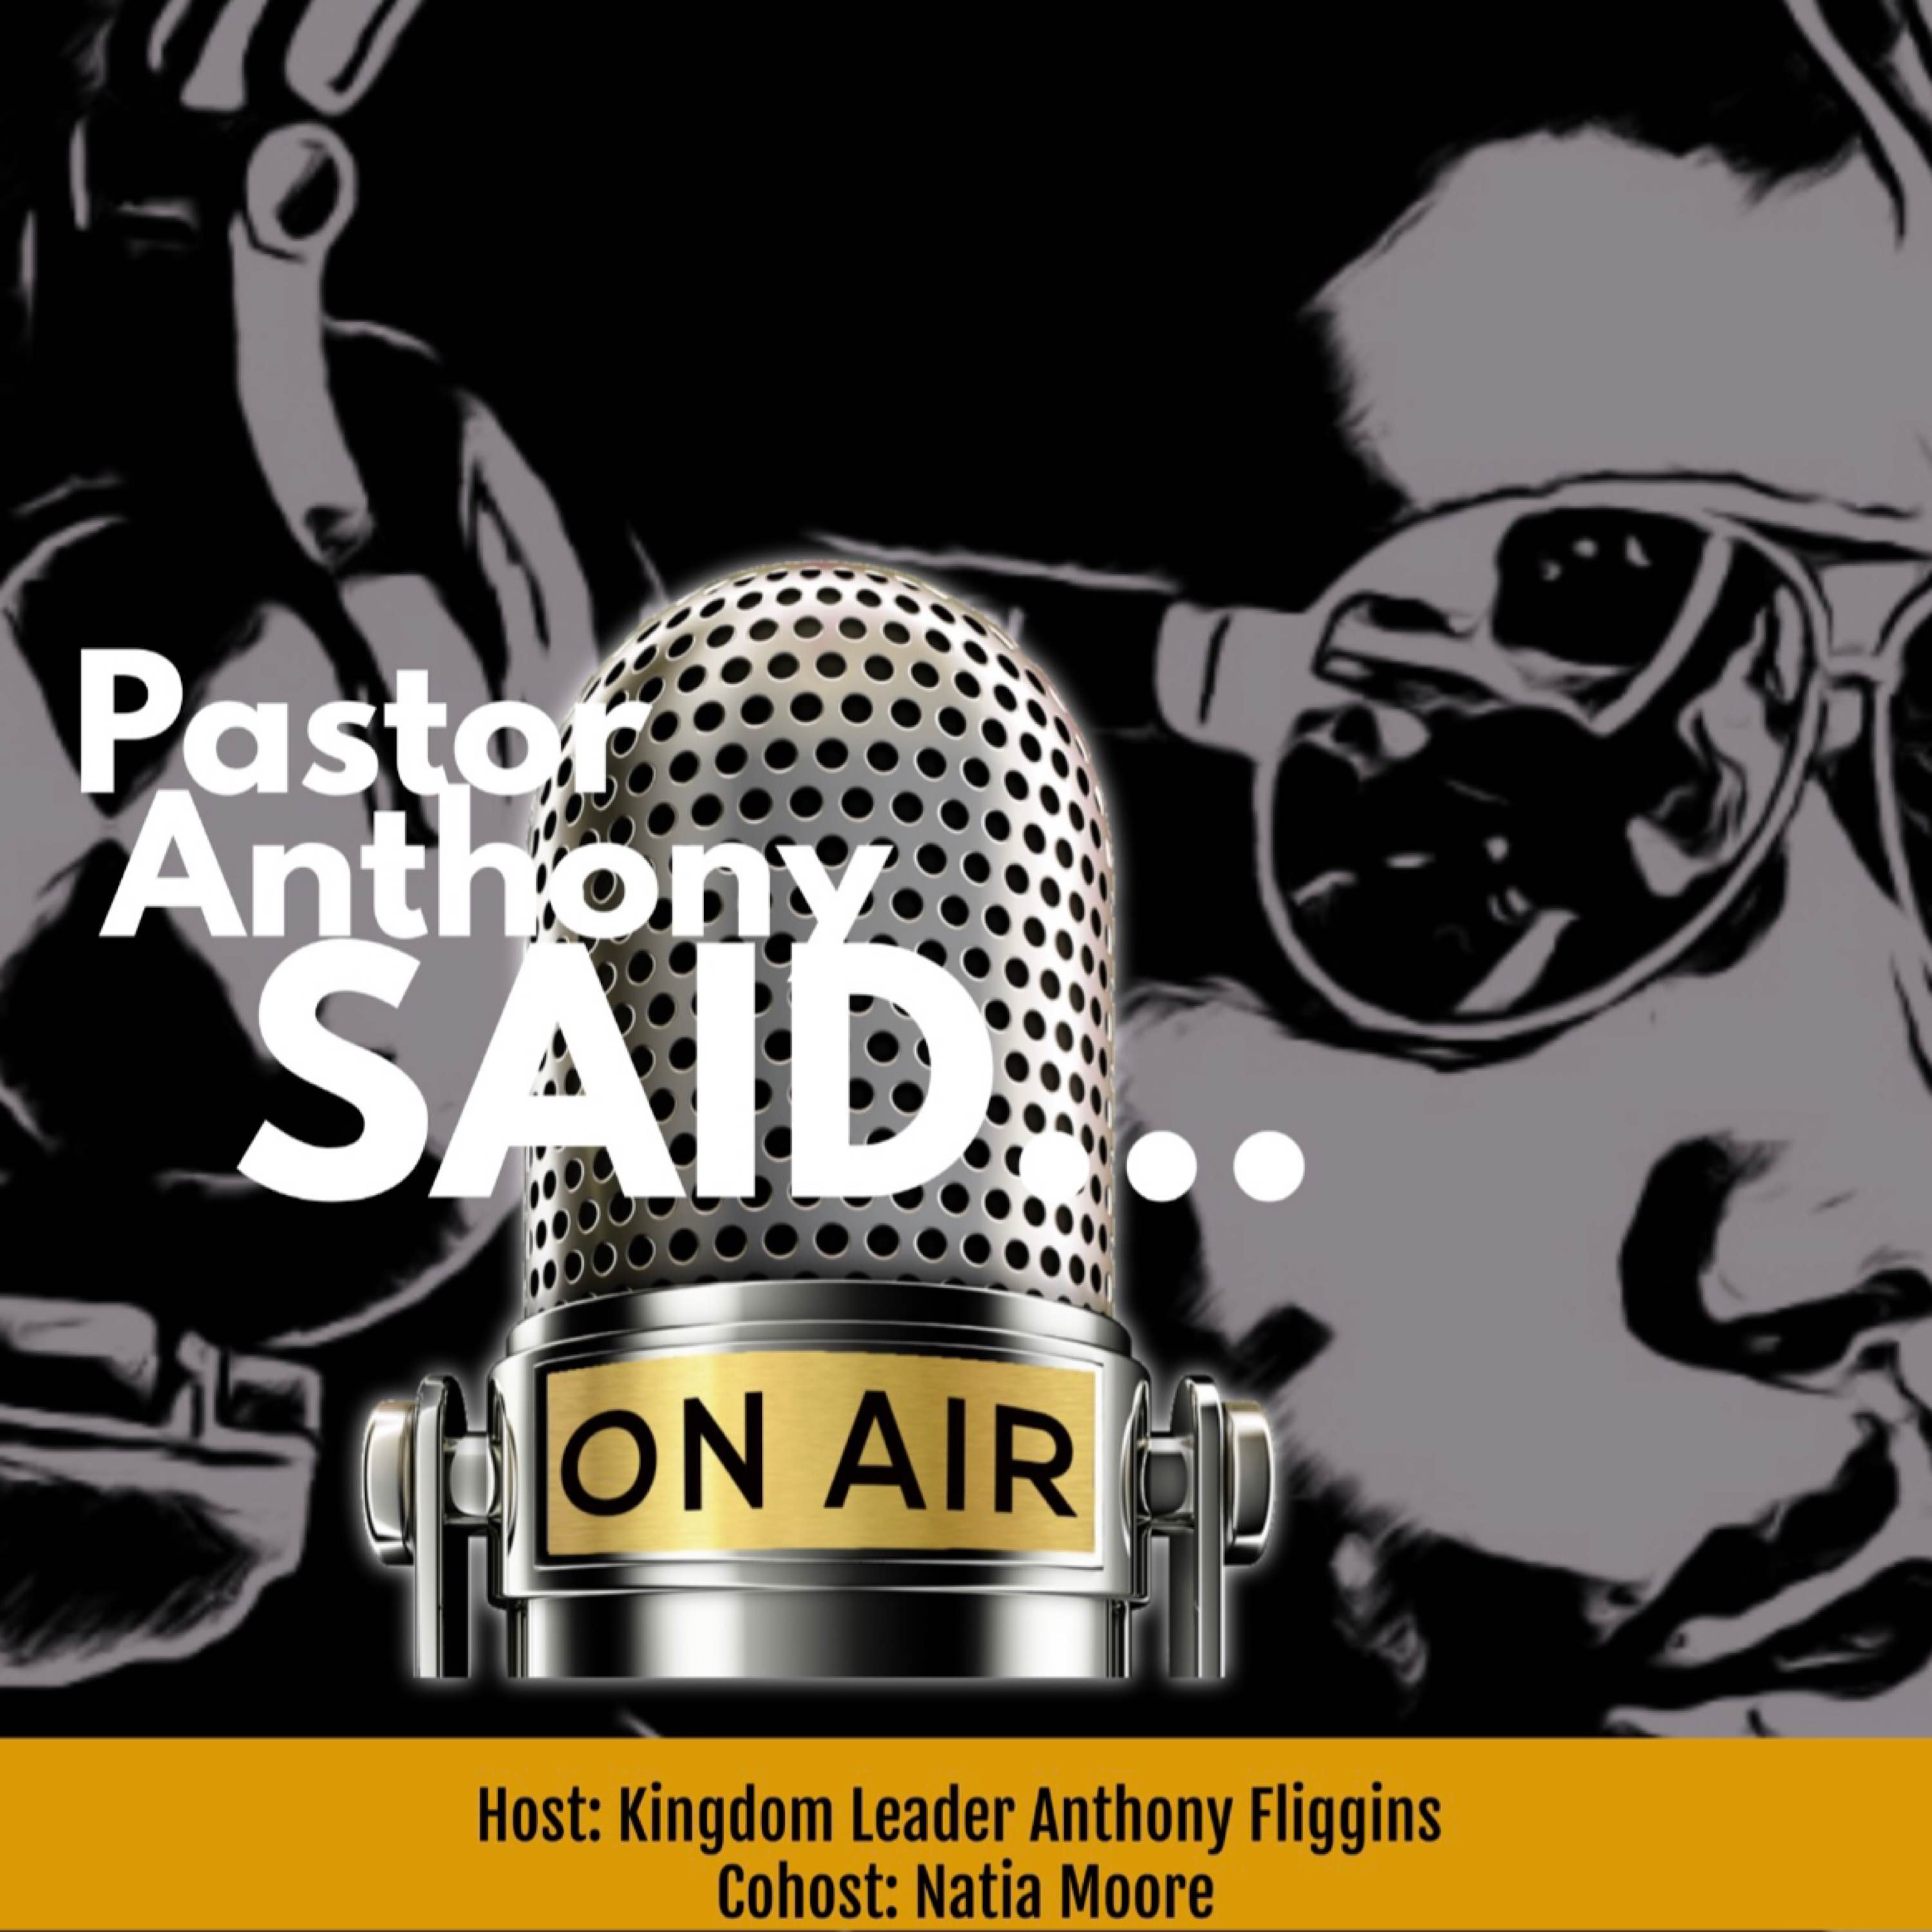 The Balanced Approach, Taking a Look at the other side, Pastor Anthony Fliggins & Natia Moore